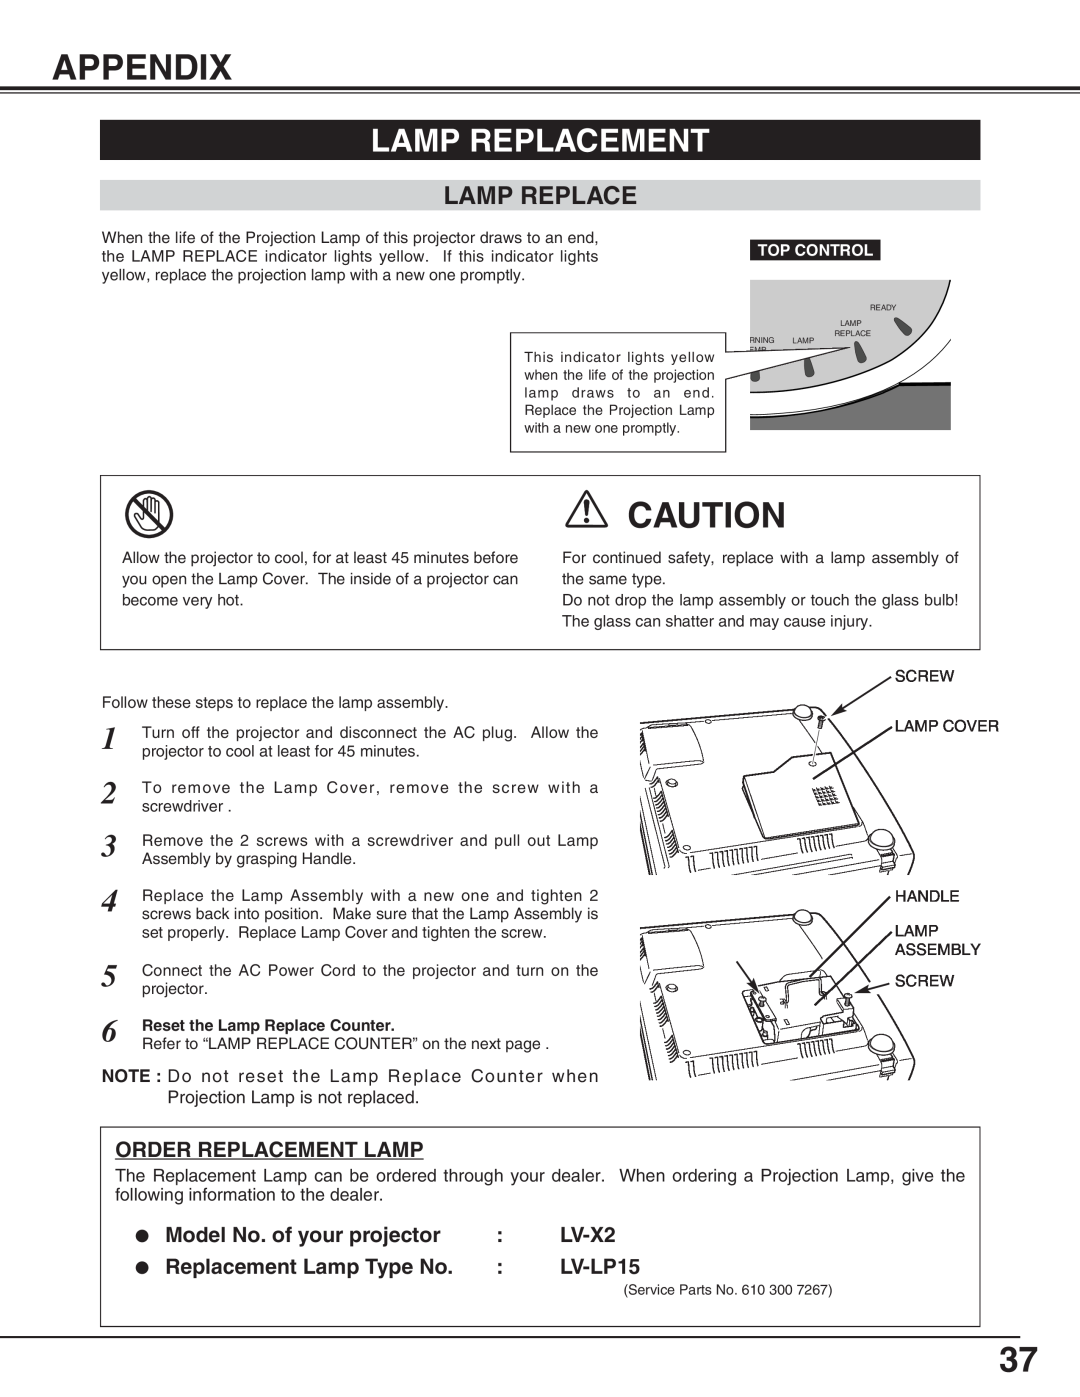 Canon LV-X2 owner manual Appendix, Lamp Replacement 